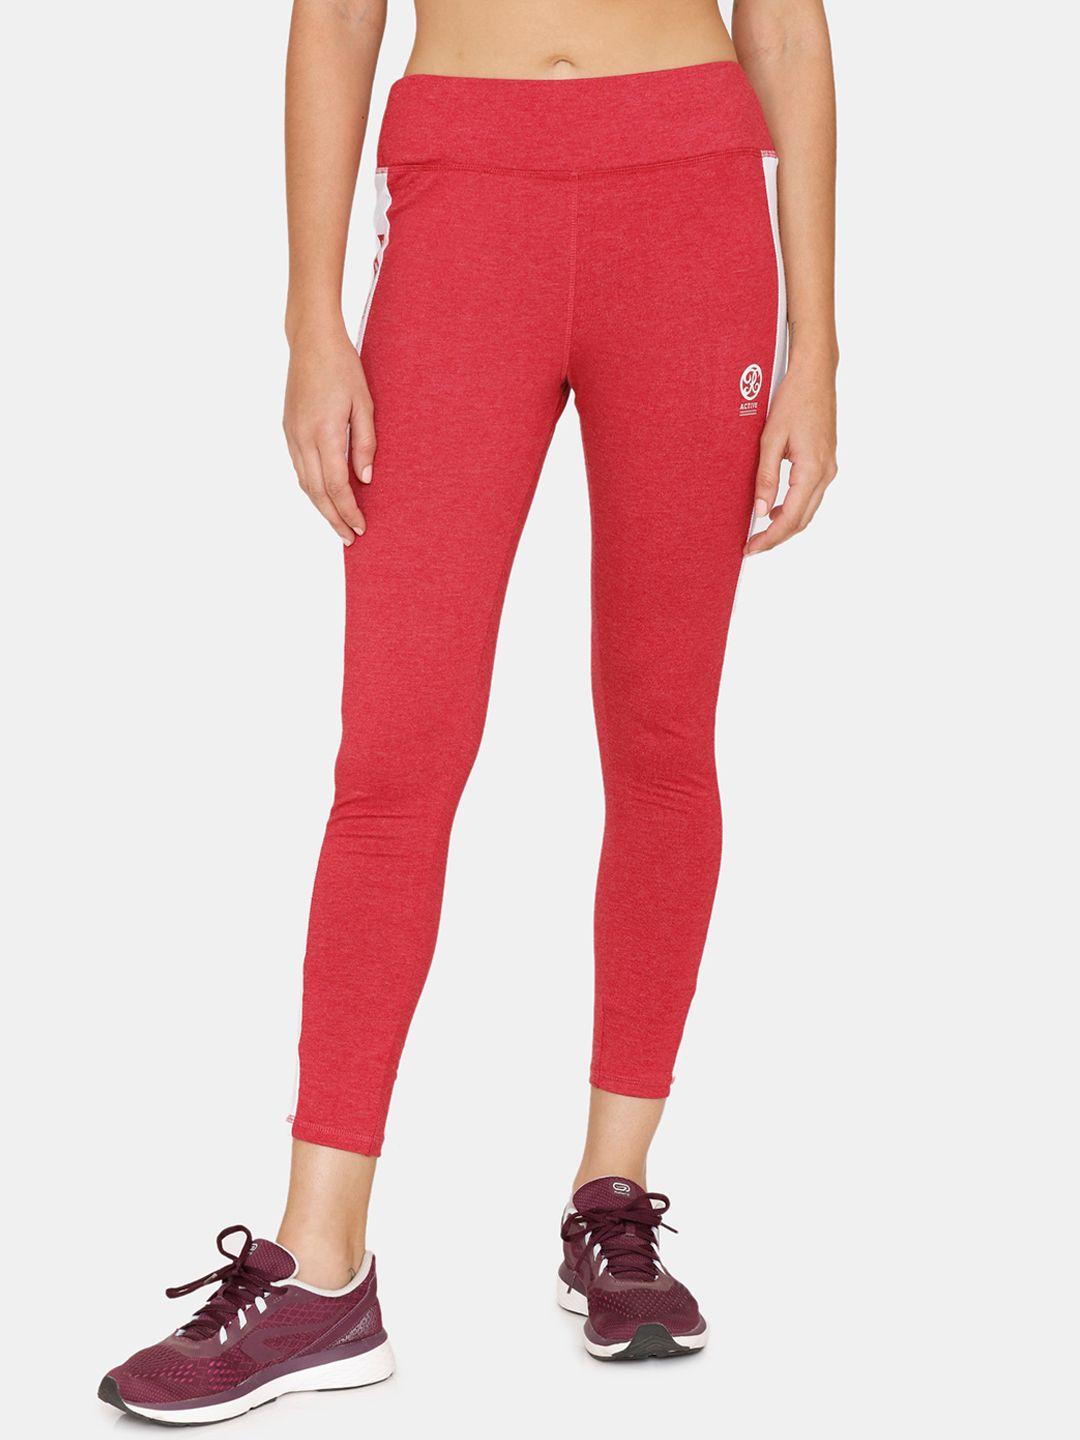 rosaline-by-zivame-women-red-solid-ankle-length-cropped-sports-tights